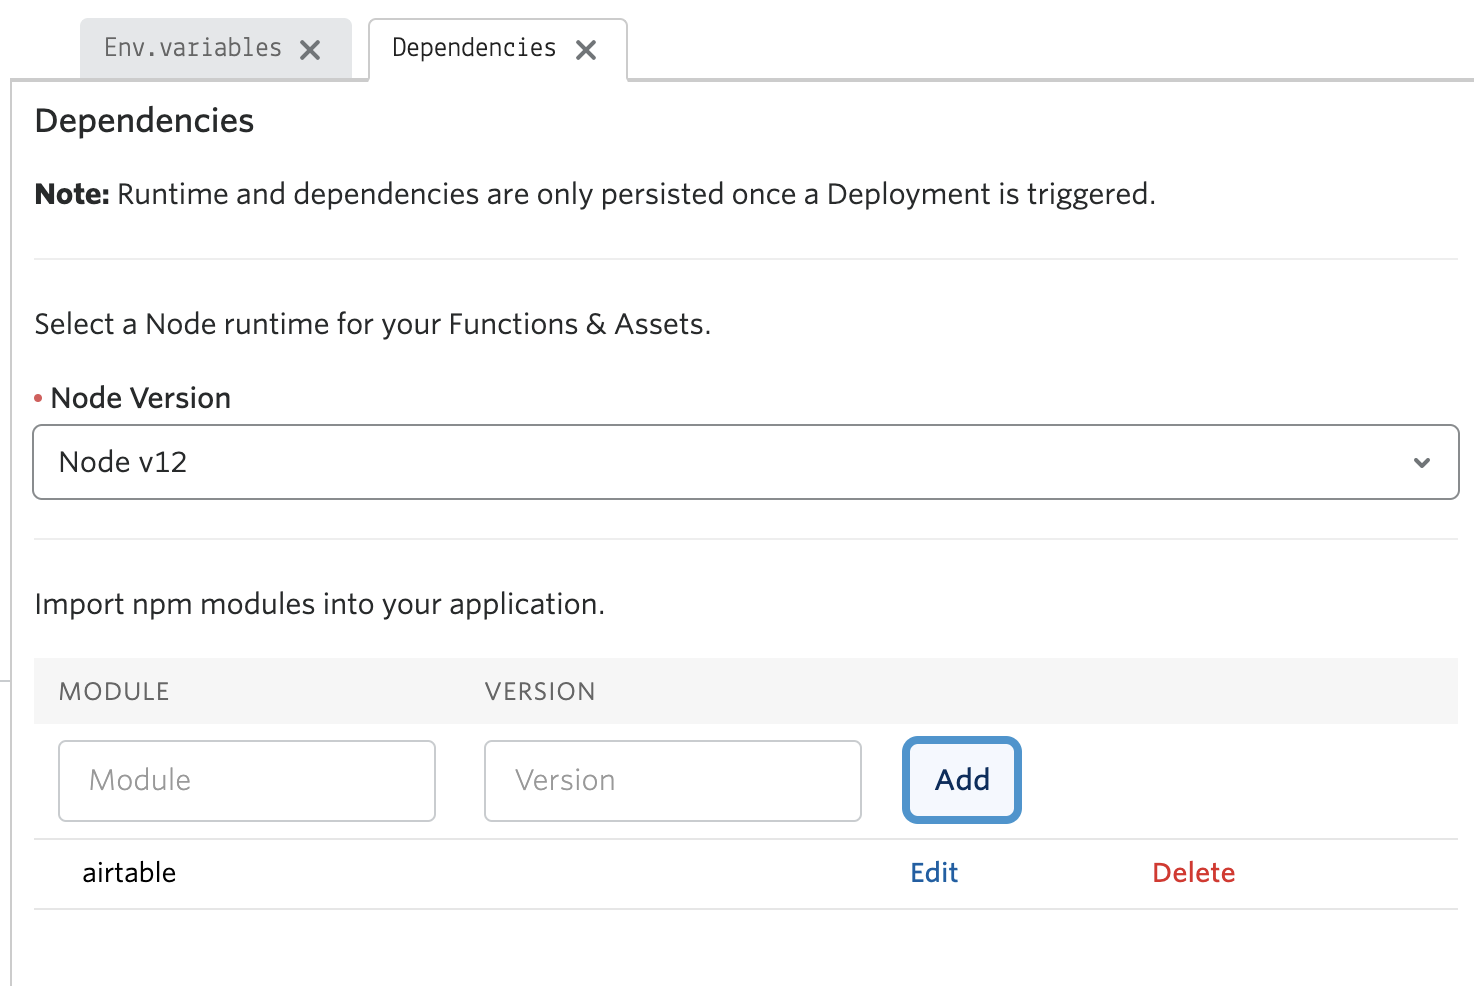 The dependencies section of Twilio Serverless, which includes airtable